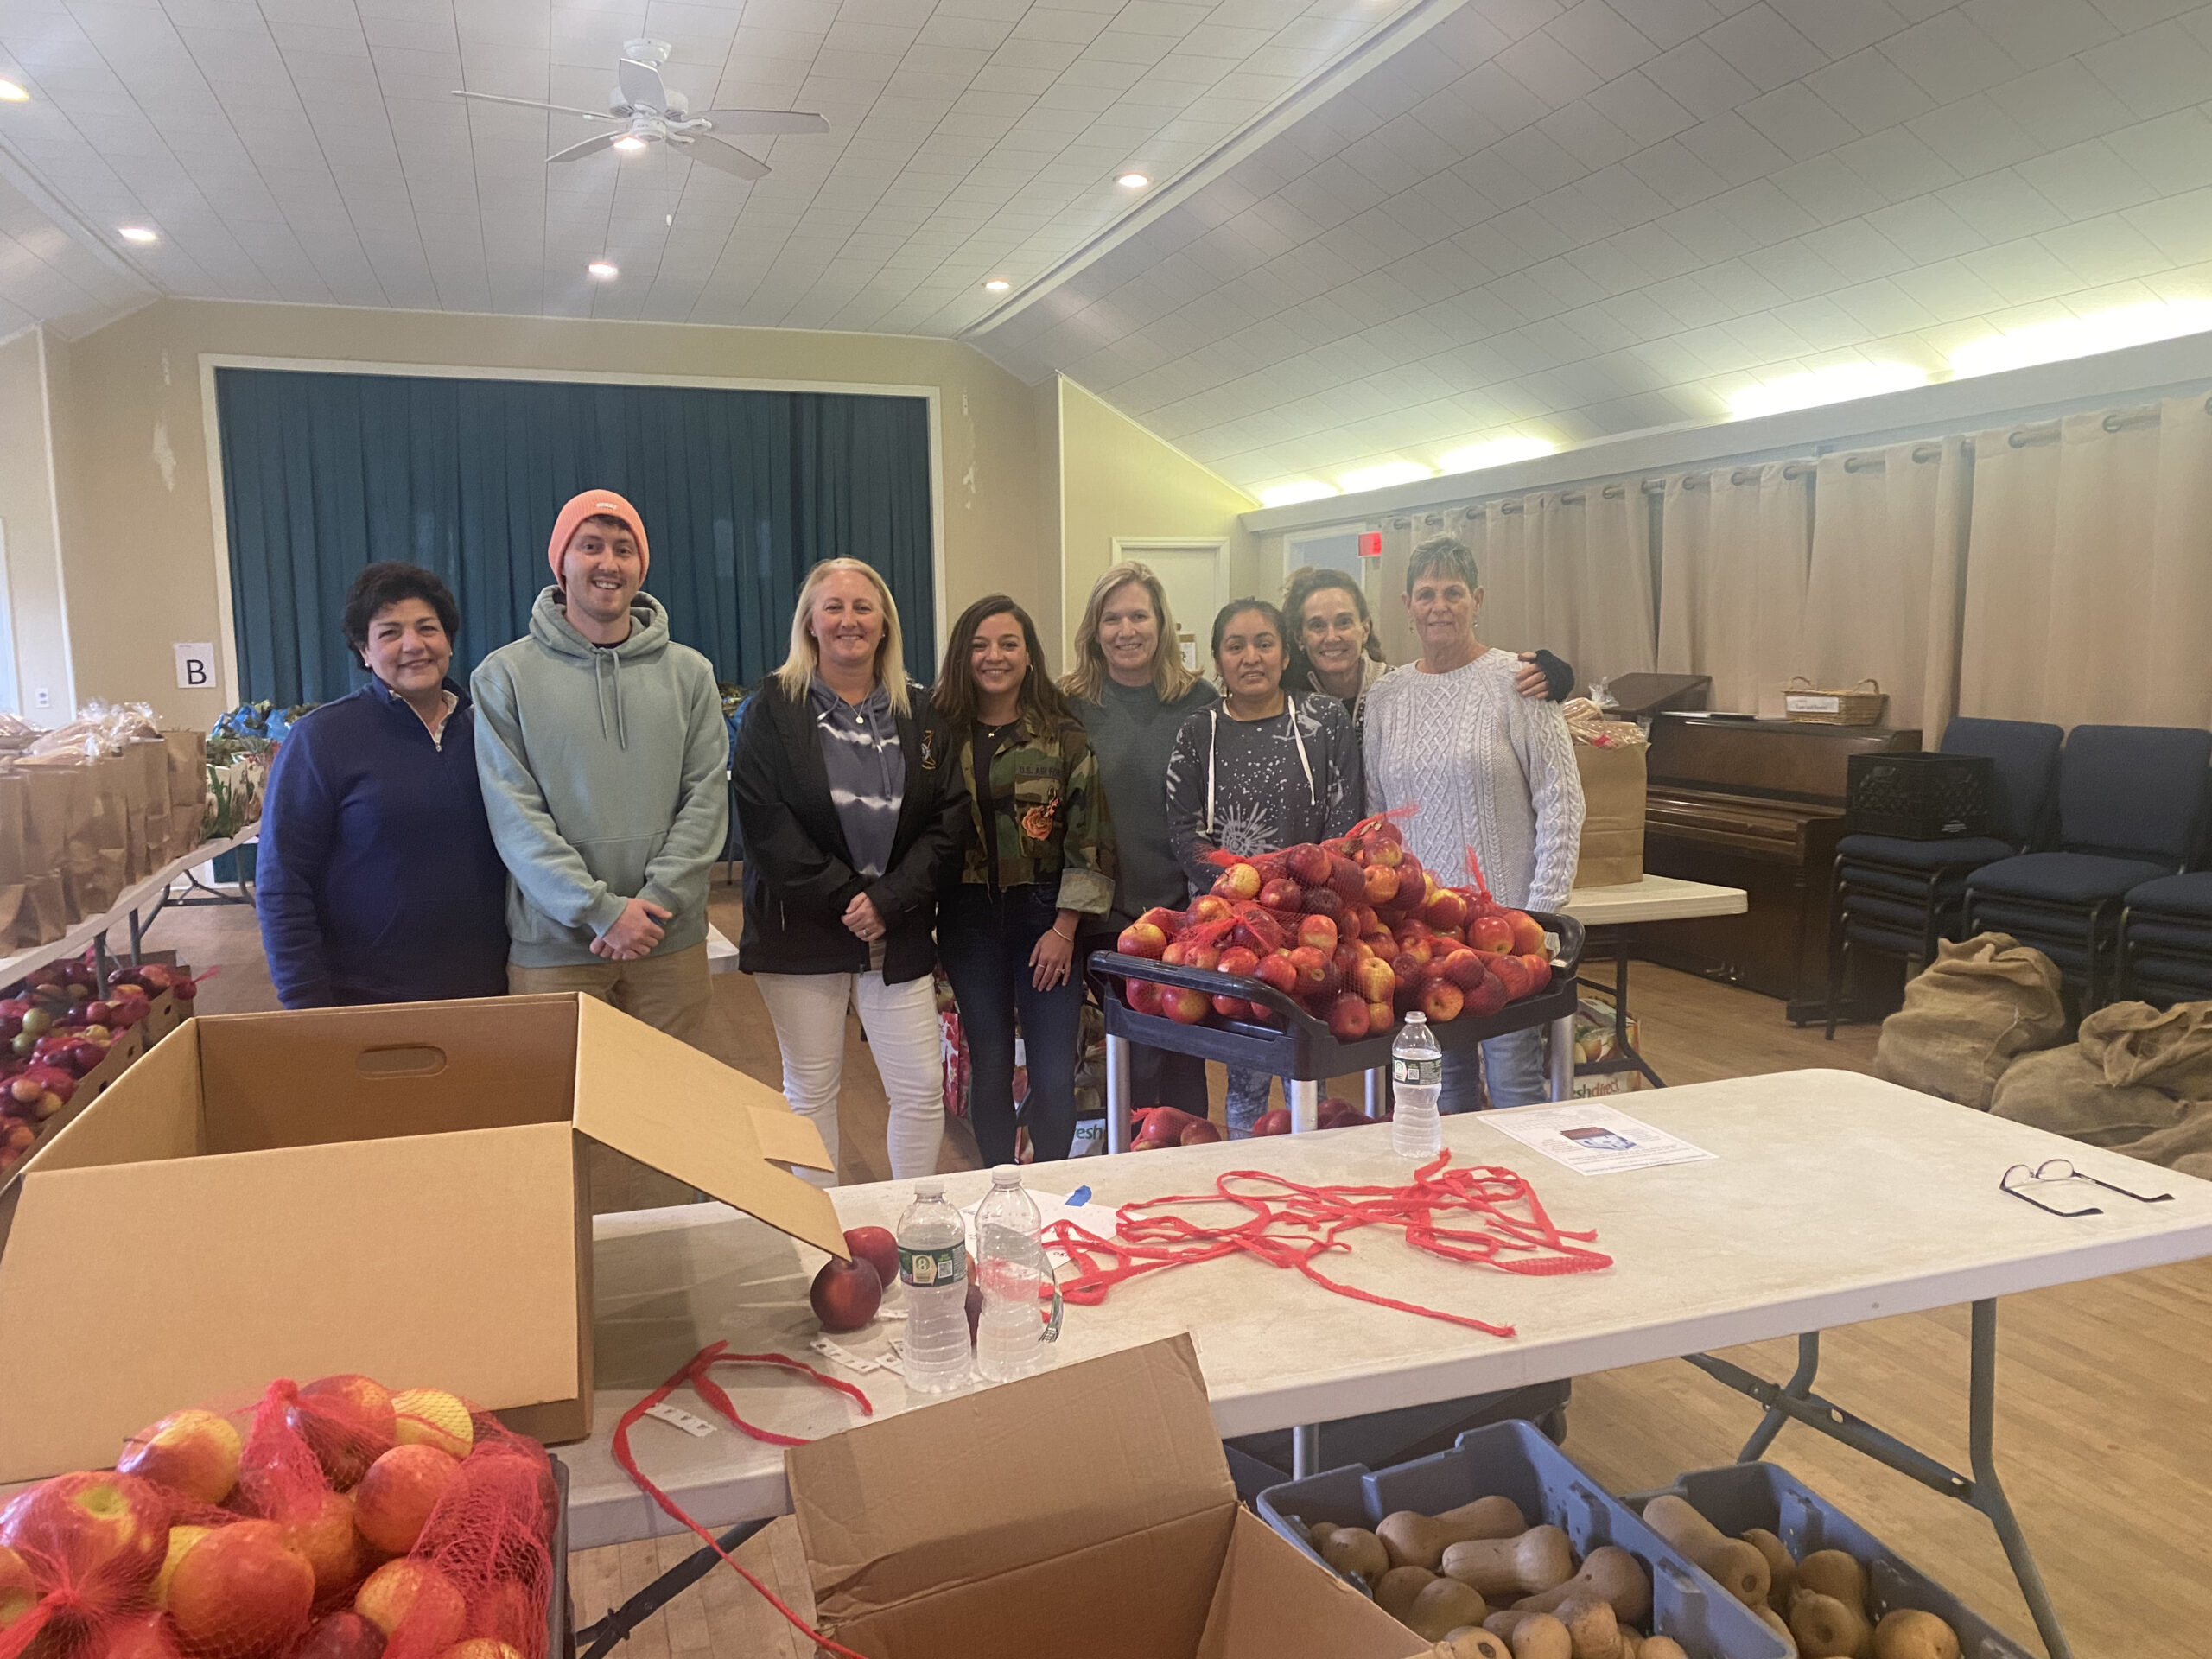 Members of the WordHampton Public Relations team, from left,  Nicole Castillo, Ashley Fresa and Ben Karlin, dropped off the items collected at a food drive honoring the firm's 30th anniversary, at the Springs Food Pantry, with help from pantry volunteers. COURTESY WORDHAMPTON